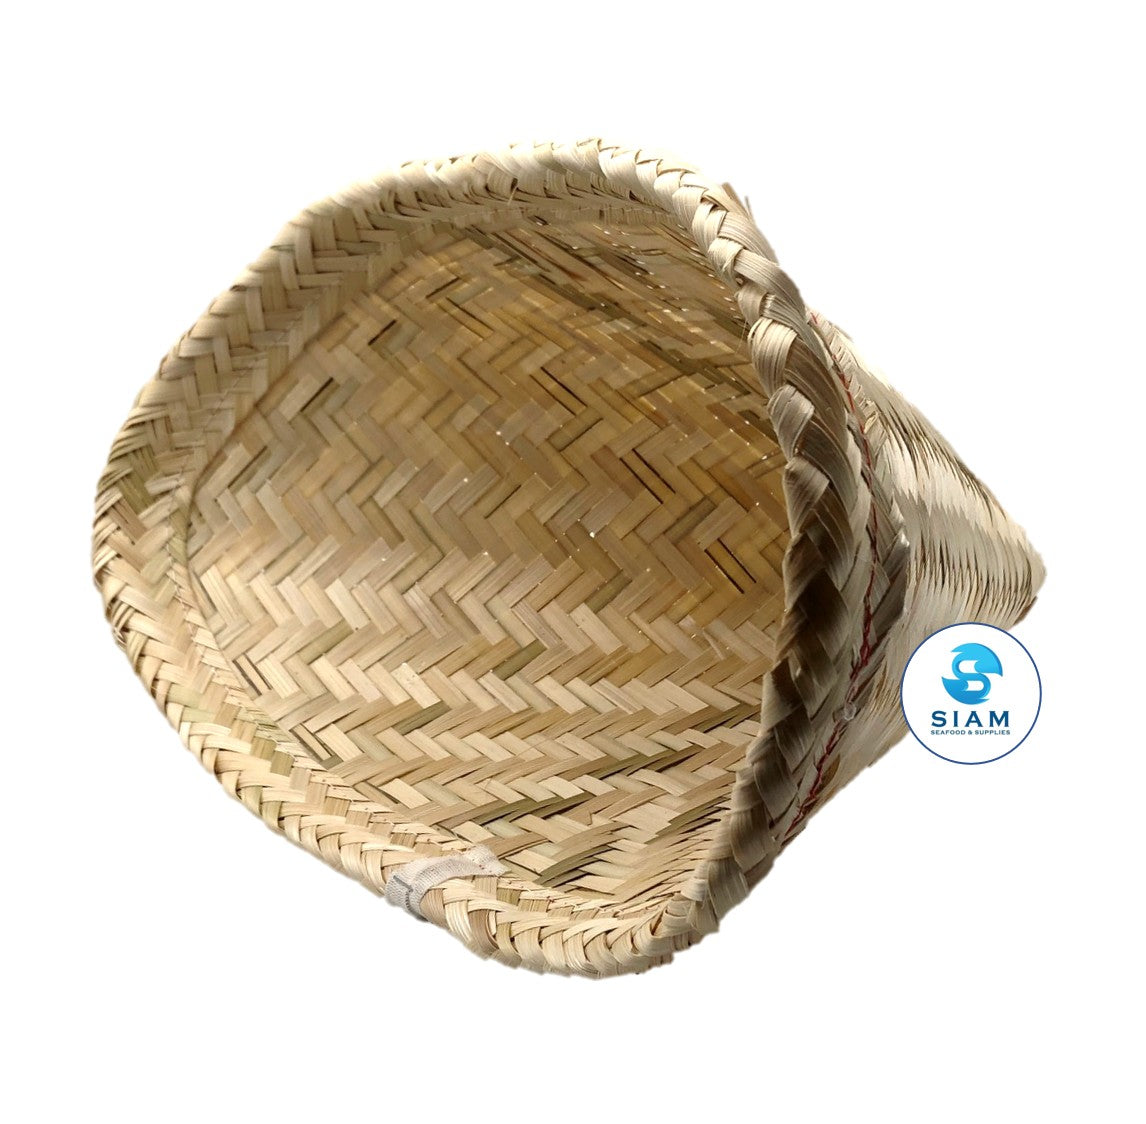 https://siamstore.us/cdn/shop/products/Sticky-Rice-Steamer-Bamboo-Basket-_5.2-oz_-Siam-Store---Thai-_-Asian-Food-Market-1620010159.jpg?v=1620010161